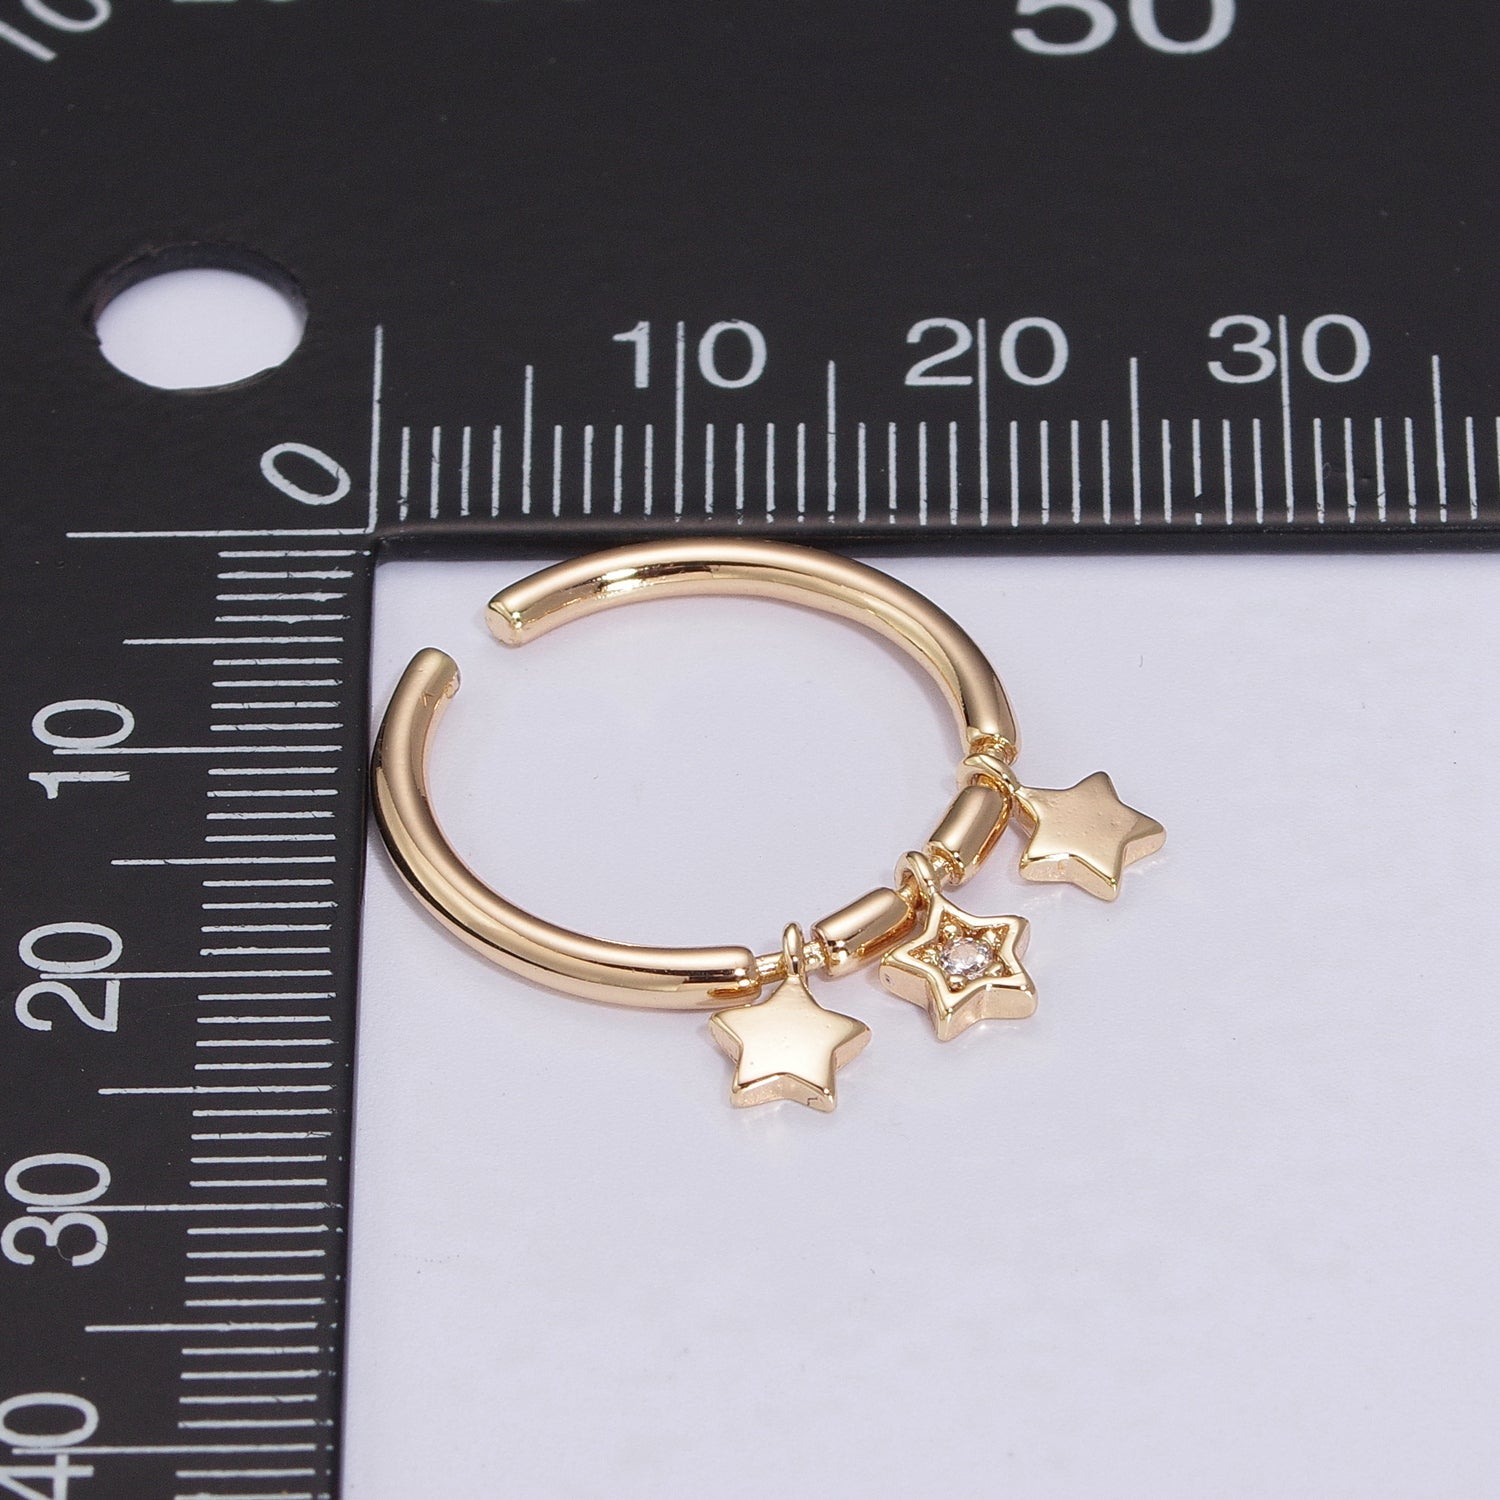 Twinkle Little Star Ring- Dainty Star Ring, 18K Gold Filled Ring, Dangly Star Stacking Ring Charm - DLUXCA